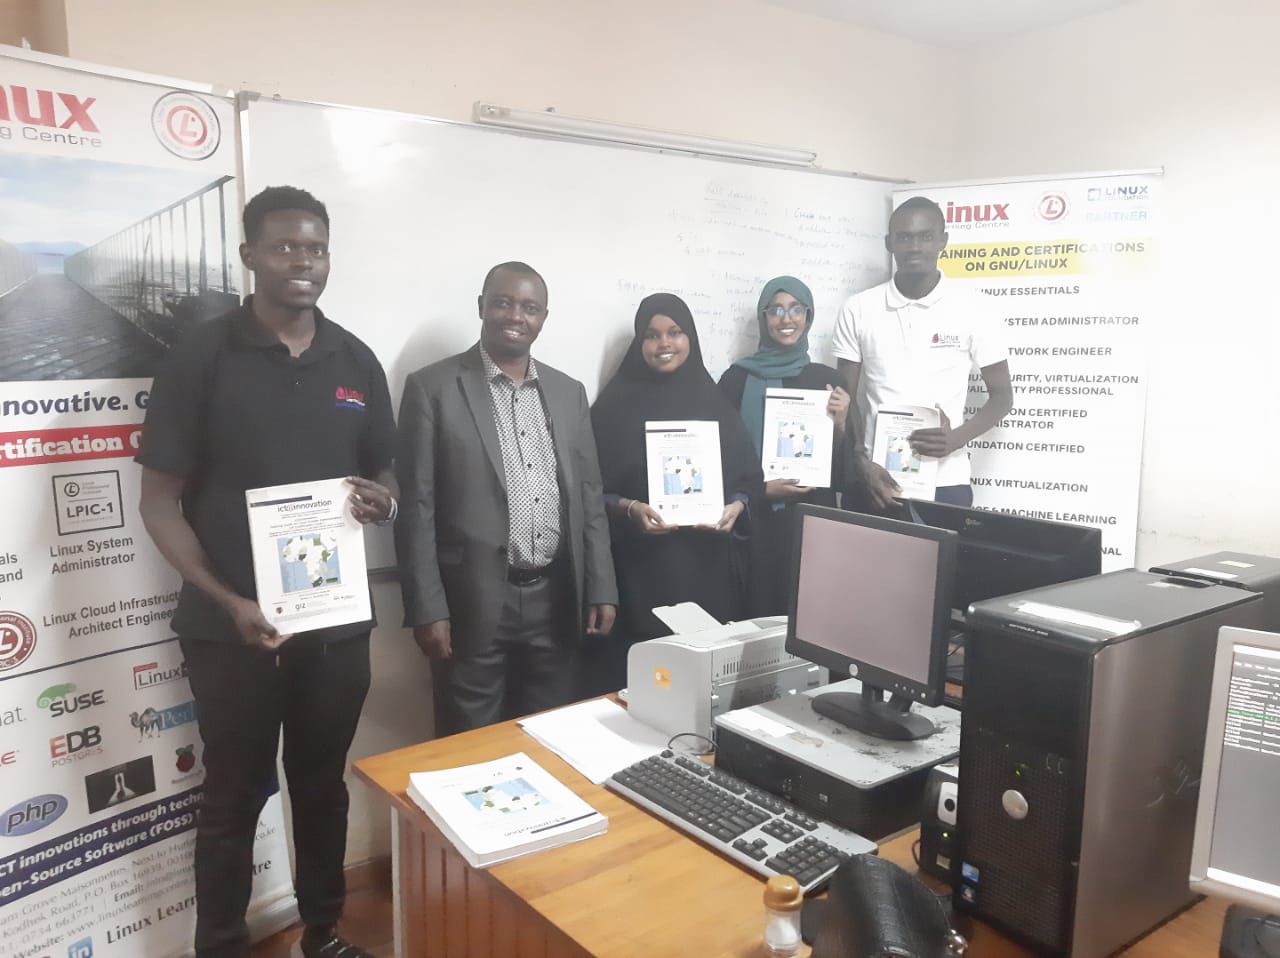 Director Linux Learning Centre Mr. Anthony Gatimu issuing LPI Linux Certificates to Participants - February 2022